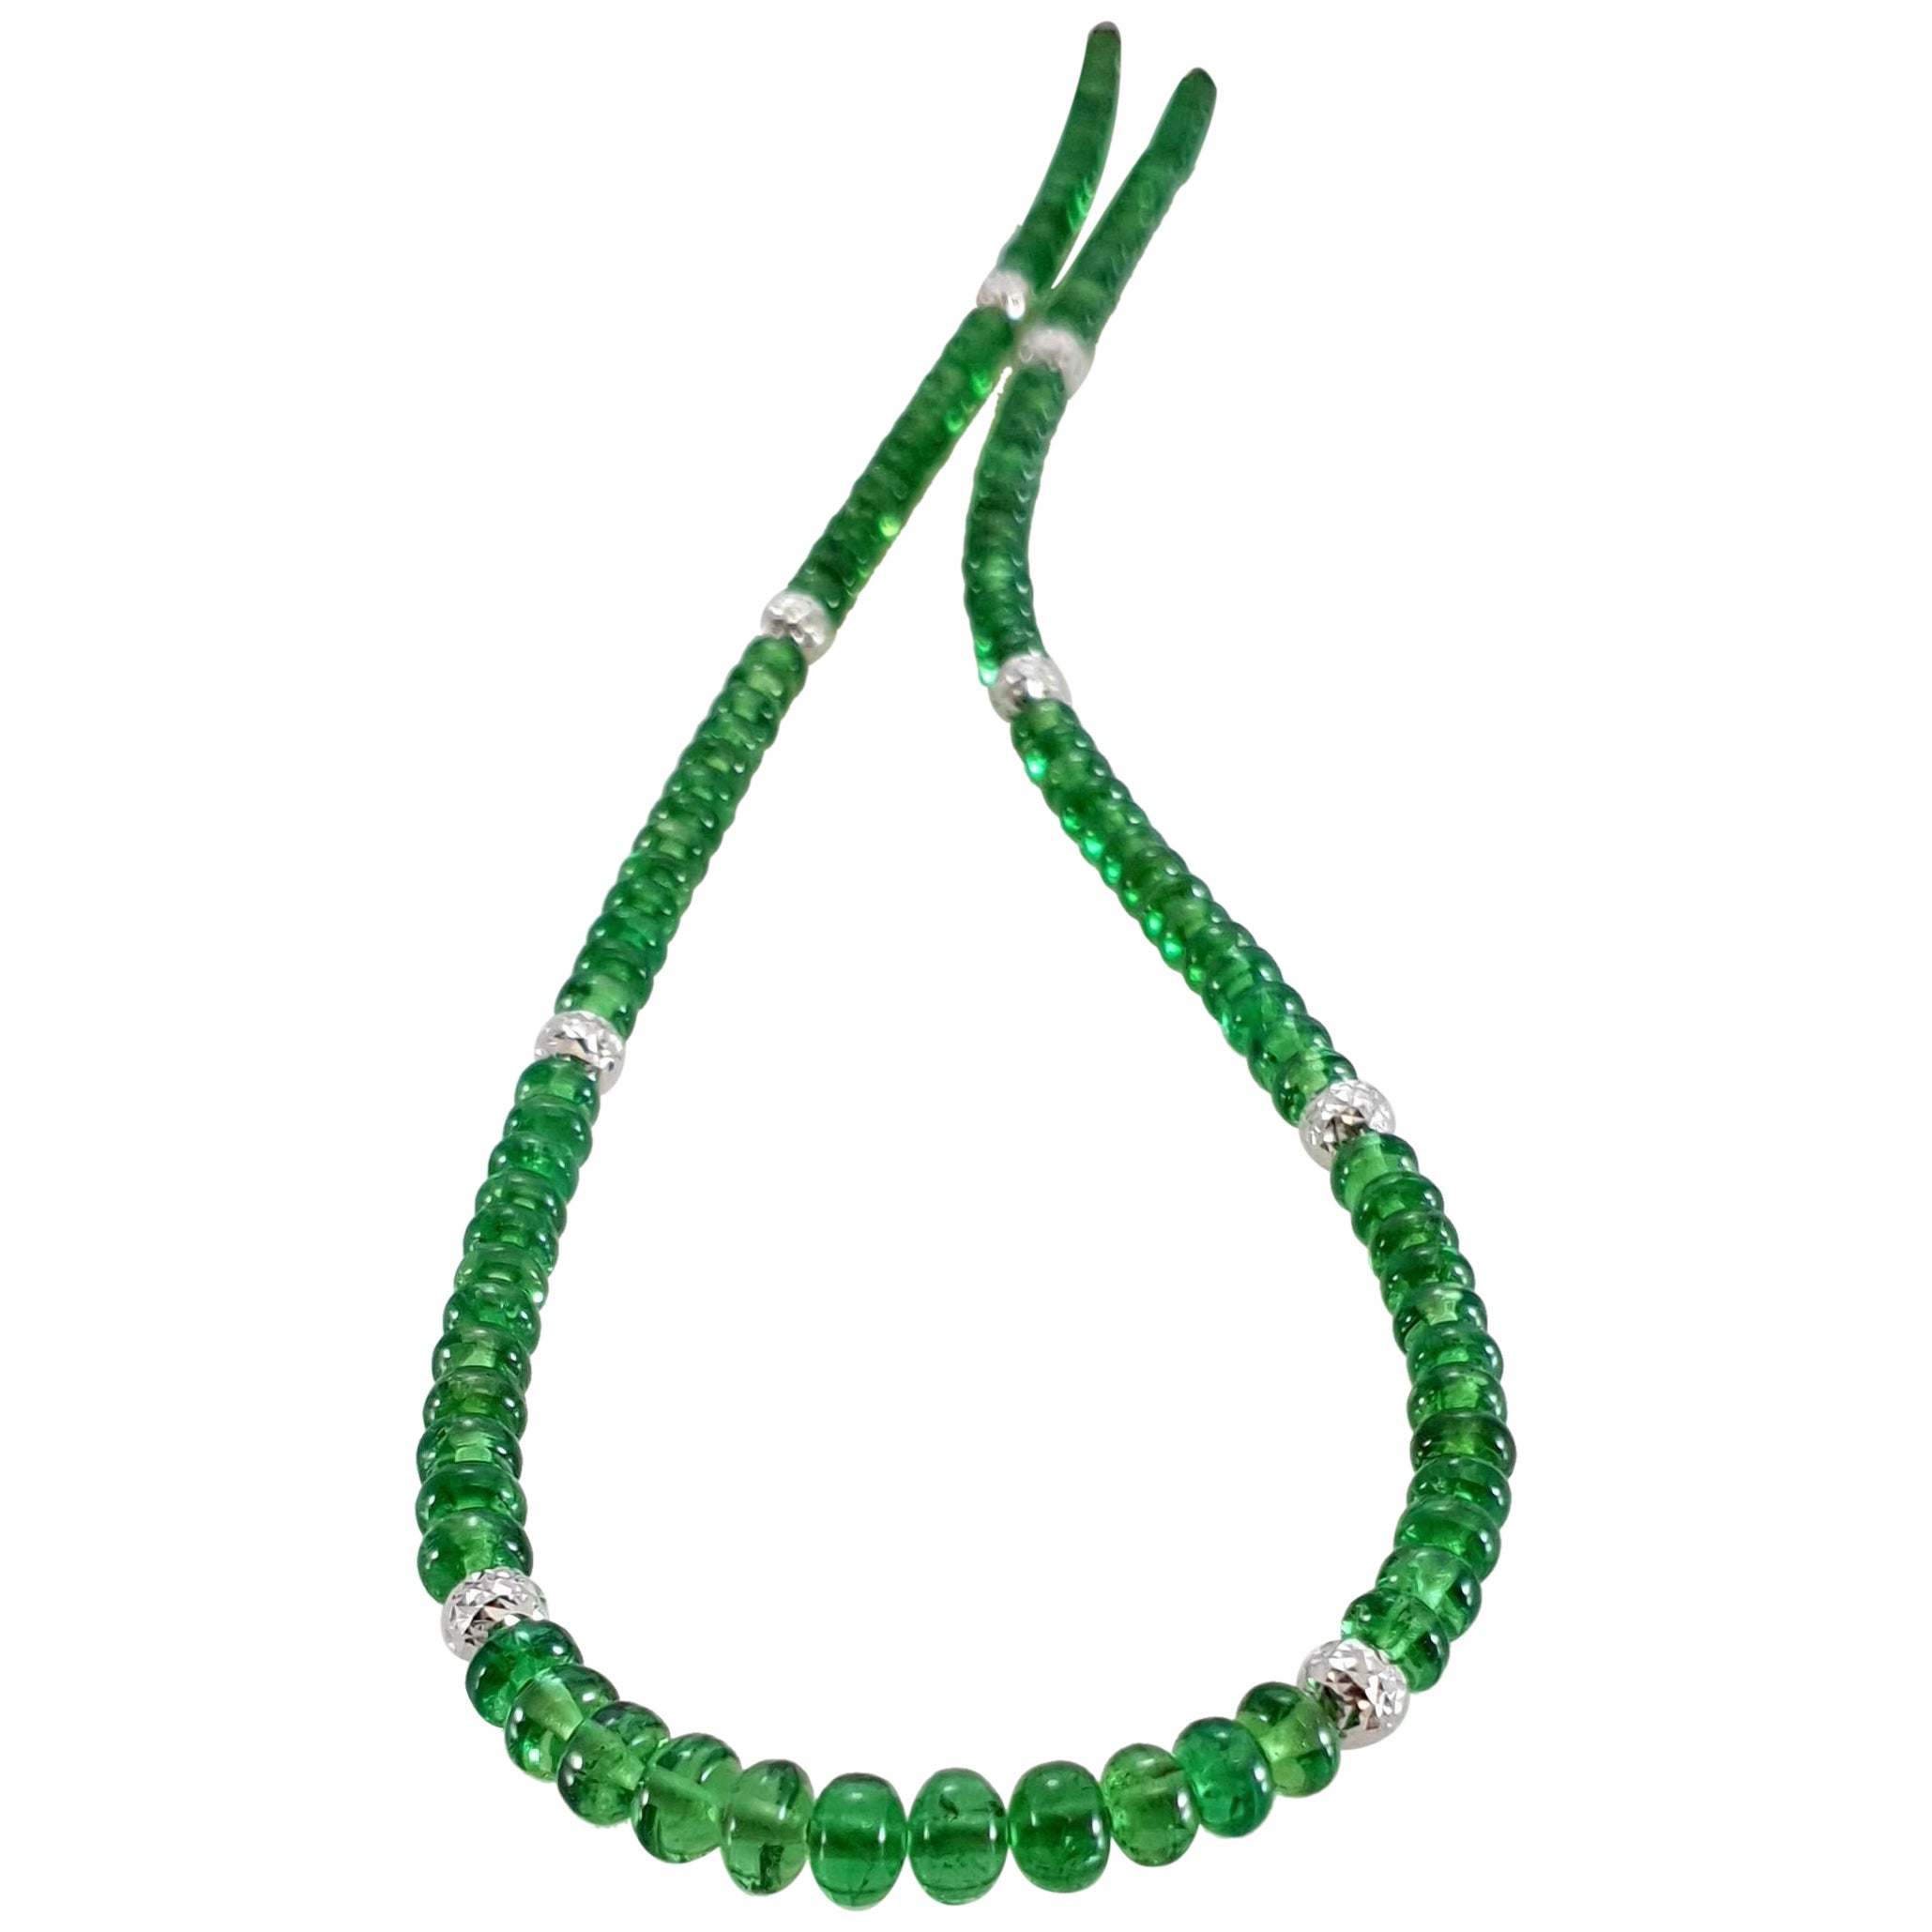 Bright Green Tsavorite Rondel Beaded Necklace with 18 Carat White Gold